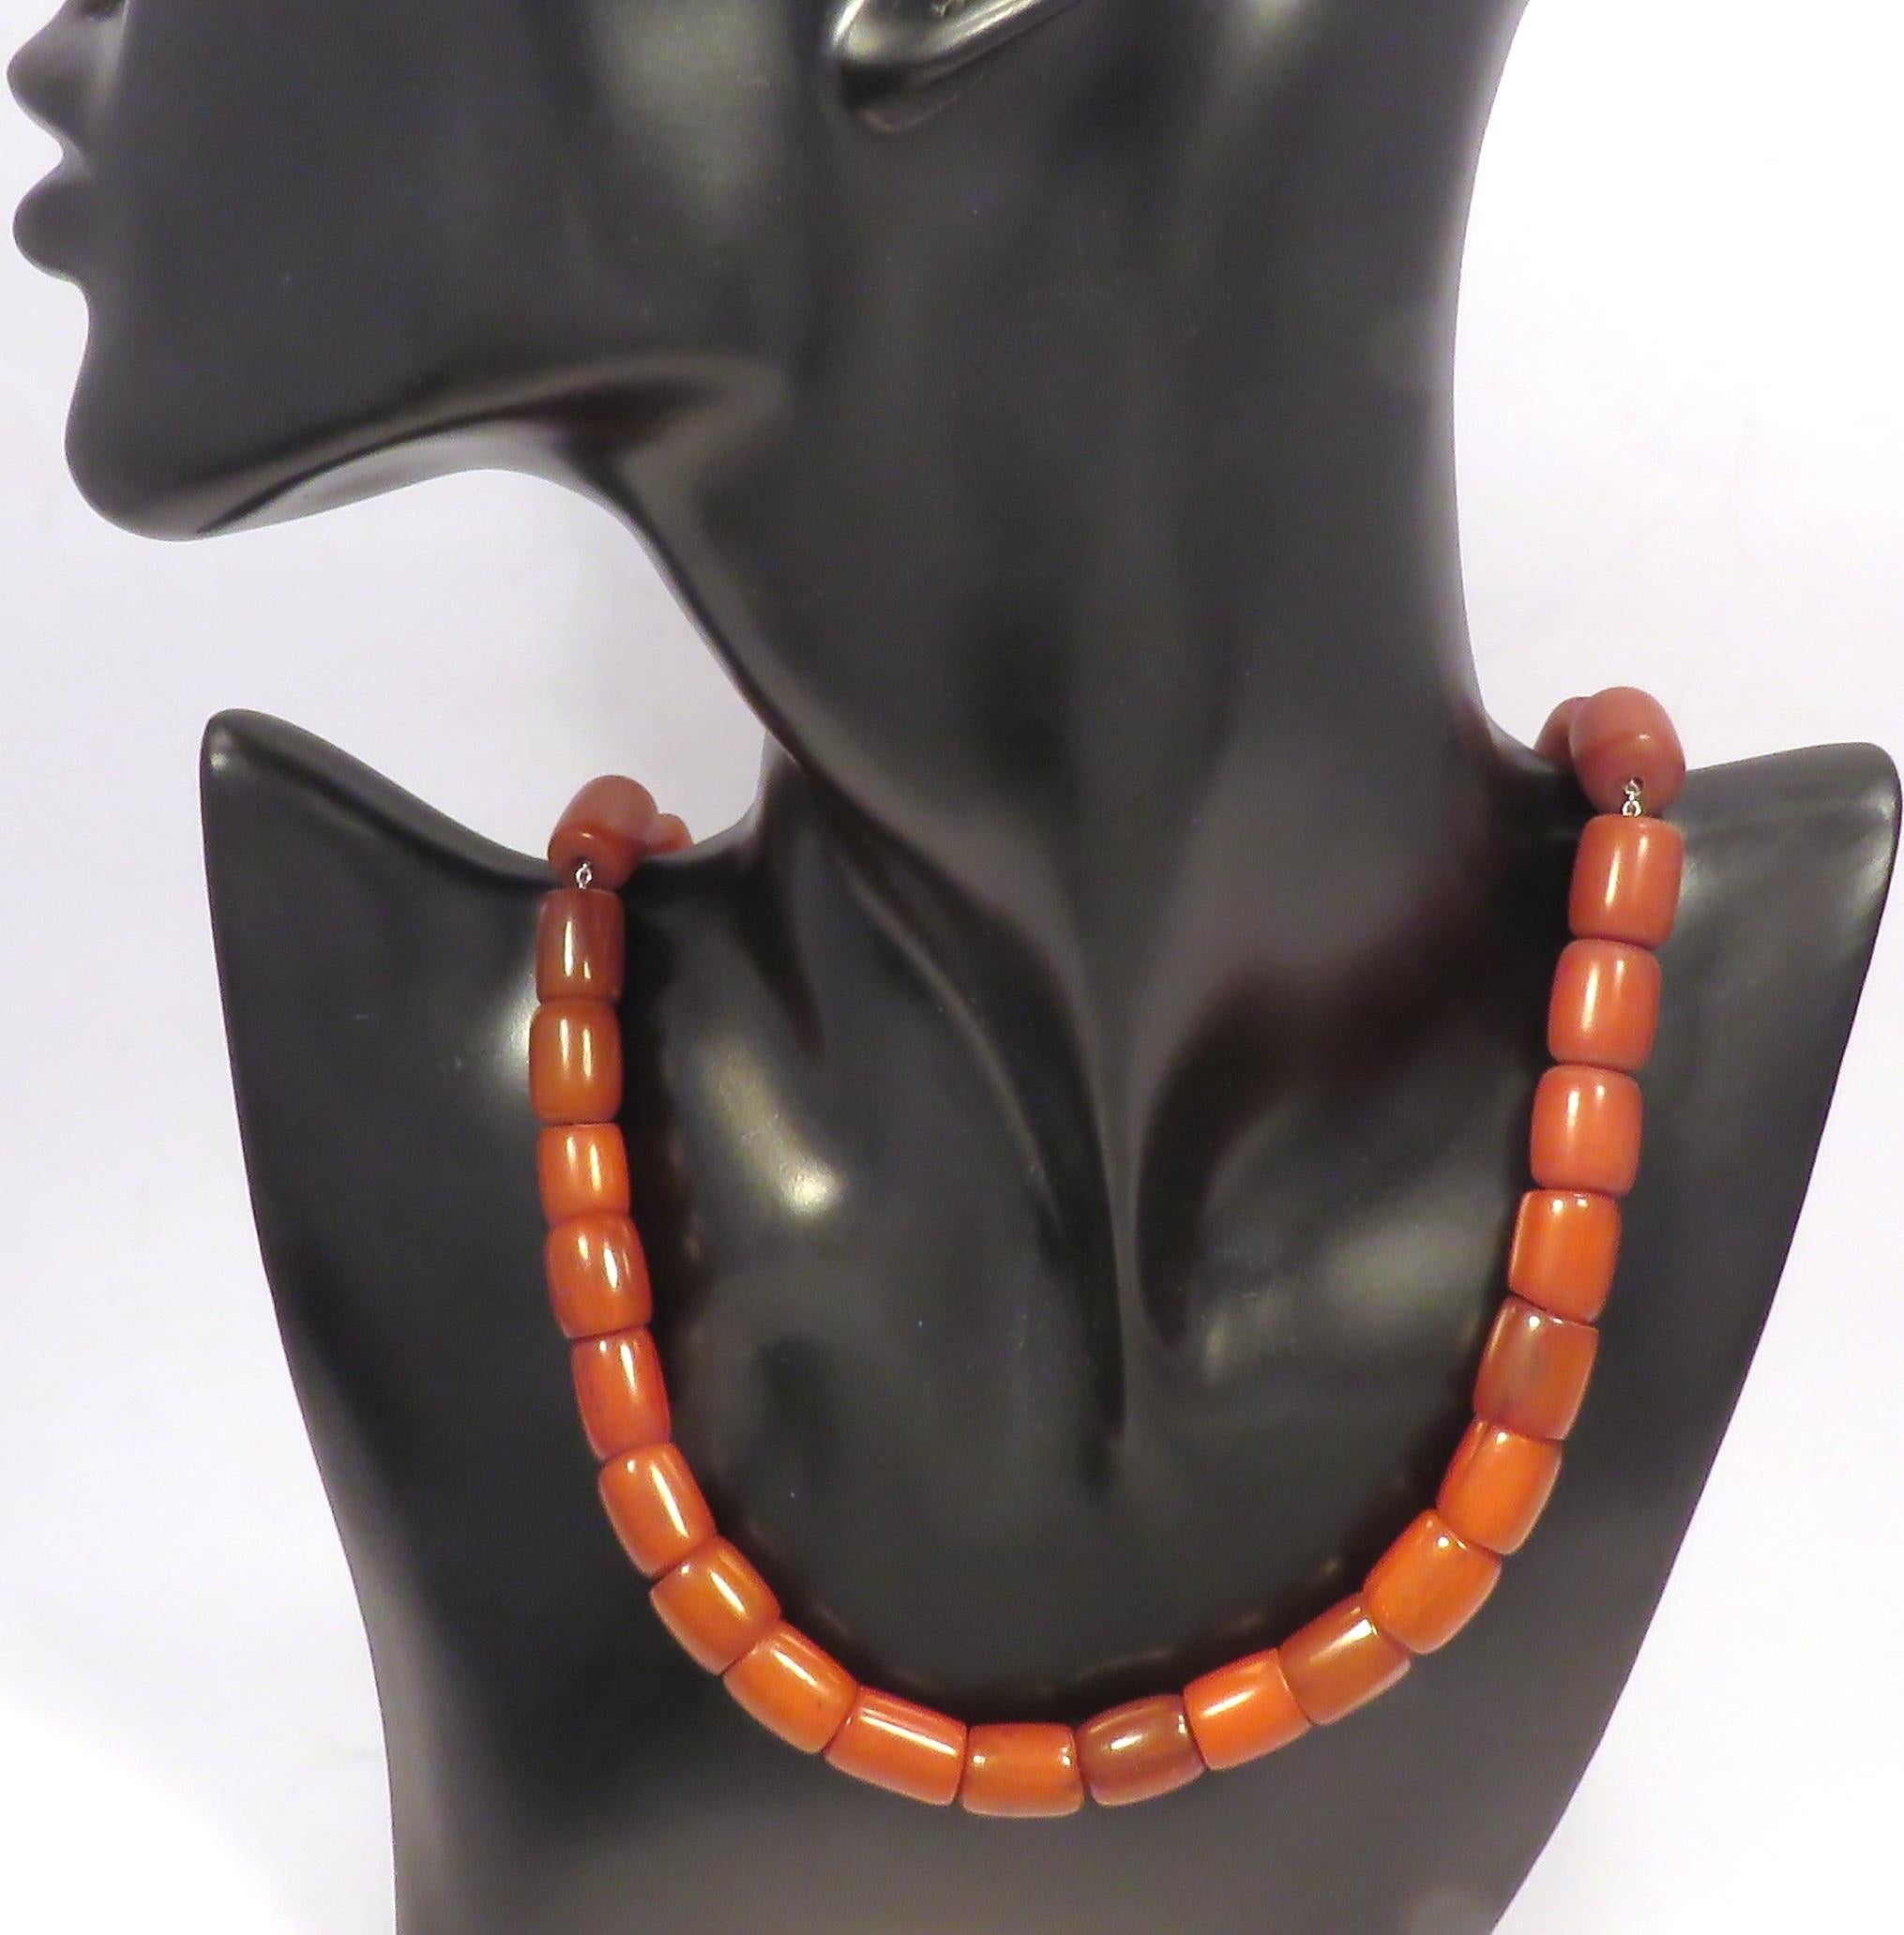 Necklace characterized by the warm color of the brownish resin resembling amber. The stones are inserted into a sterling silver chain with 9 karat rose gold ending and clasp. The necklace length is adjustable from 500 mm to 540 mm / from 19.685